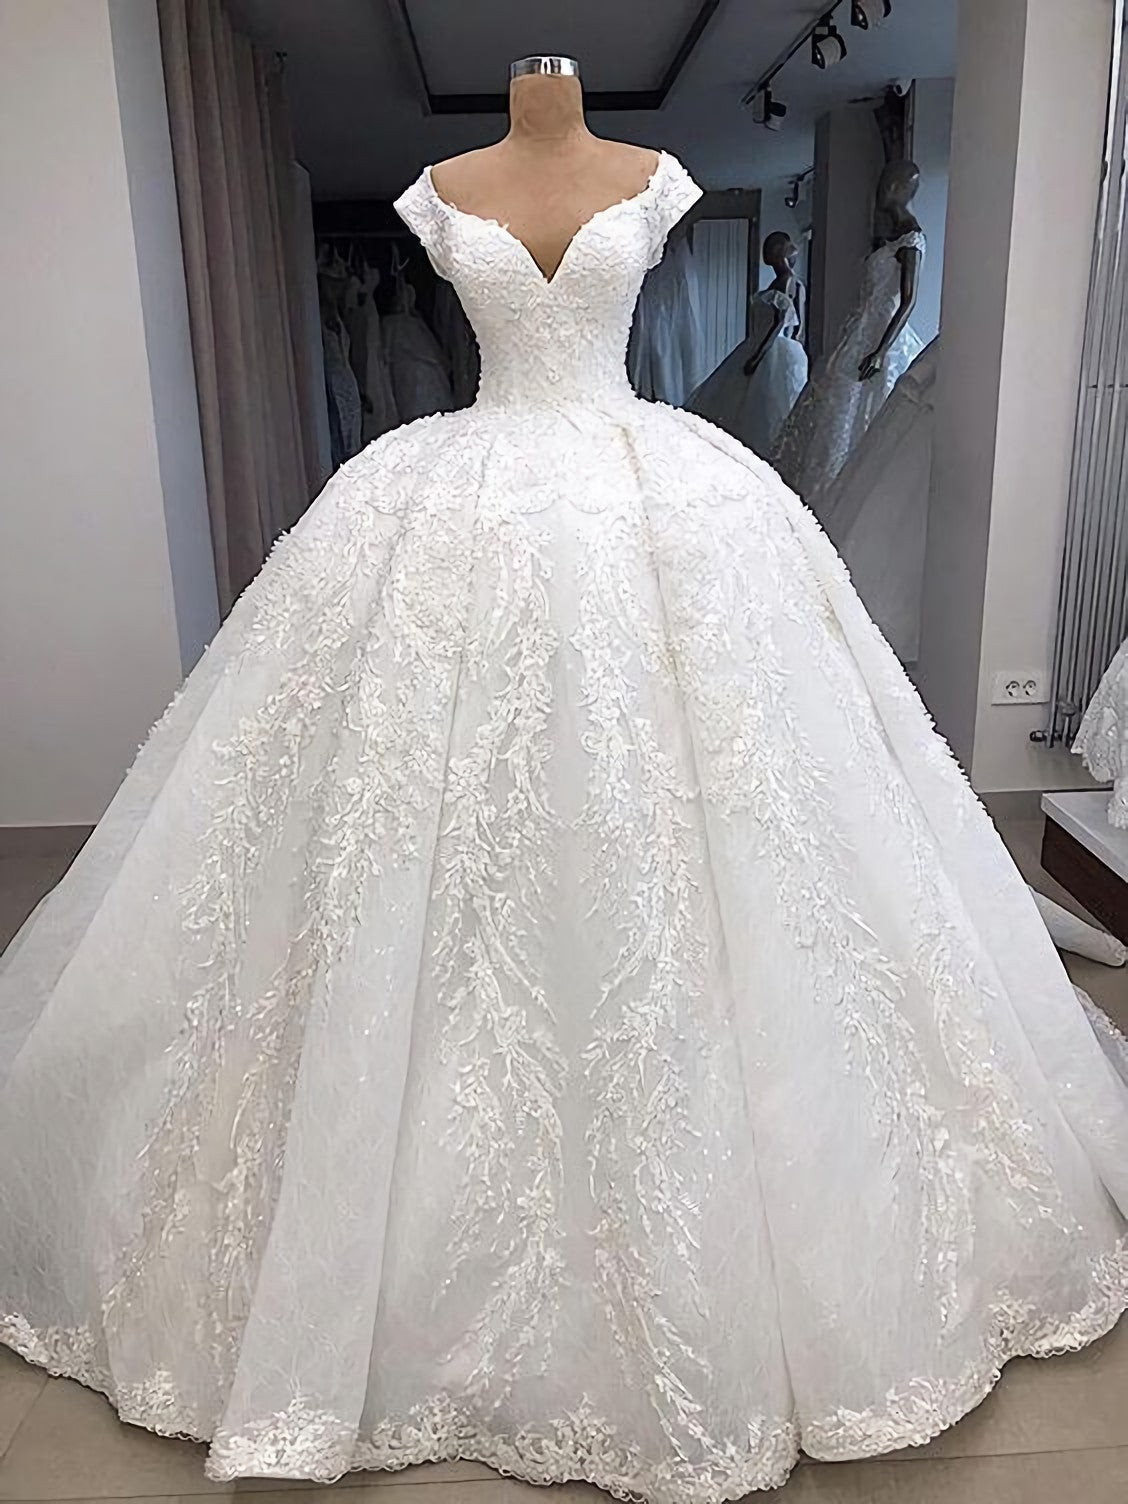 Wedding Dresses For Short Brides, Sexy Prom Dress, Ball Gown Evening Dress, Wedding Dress